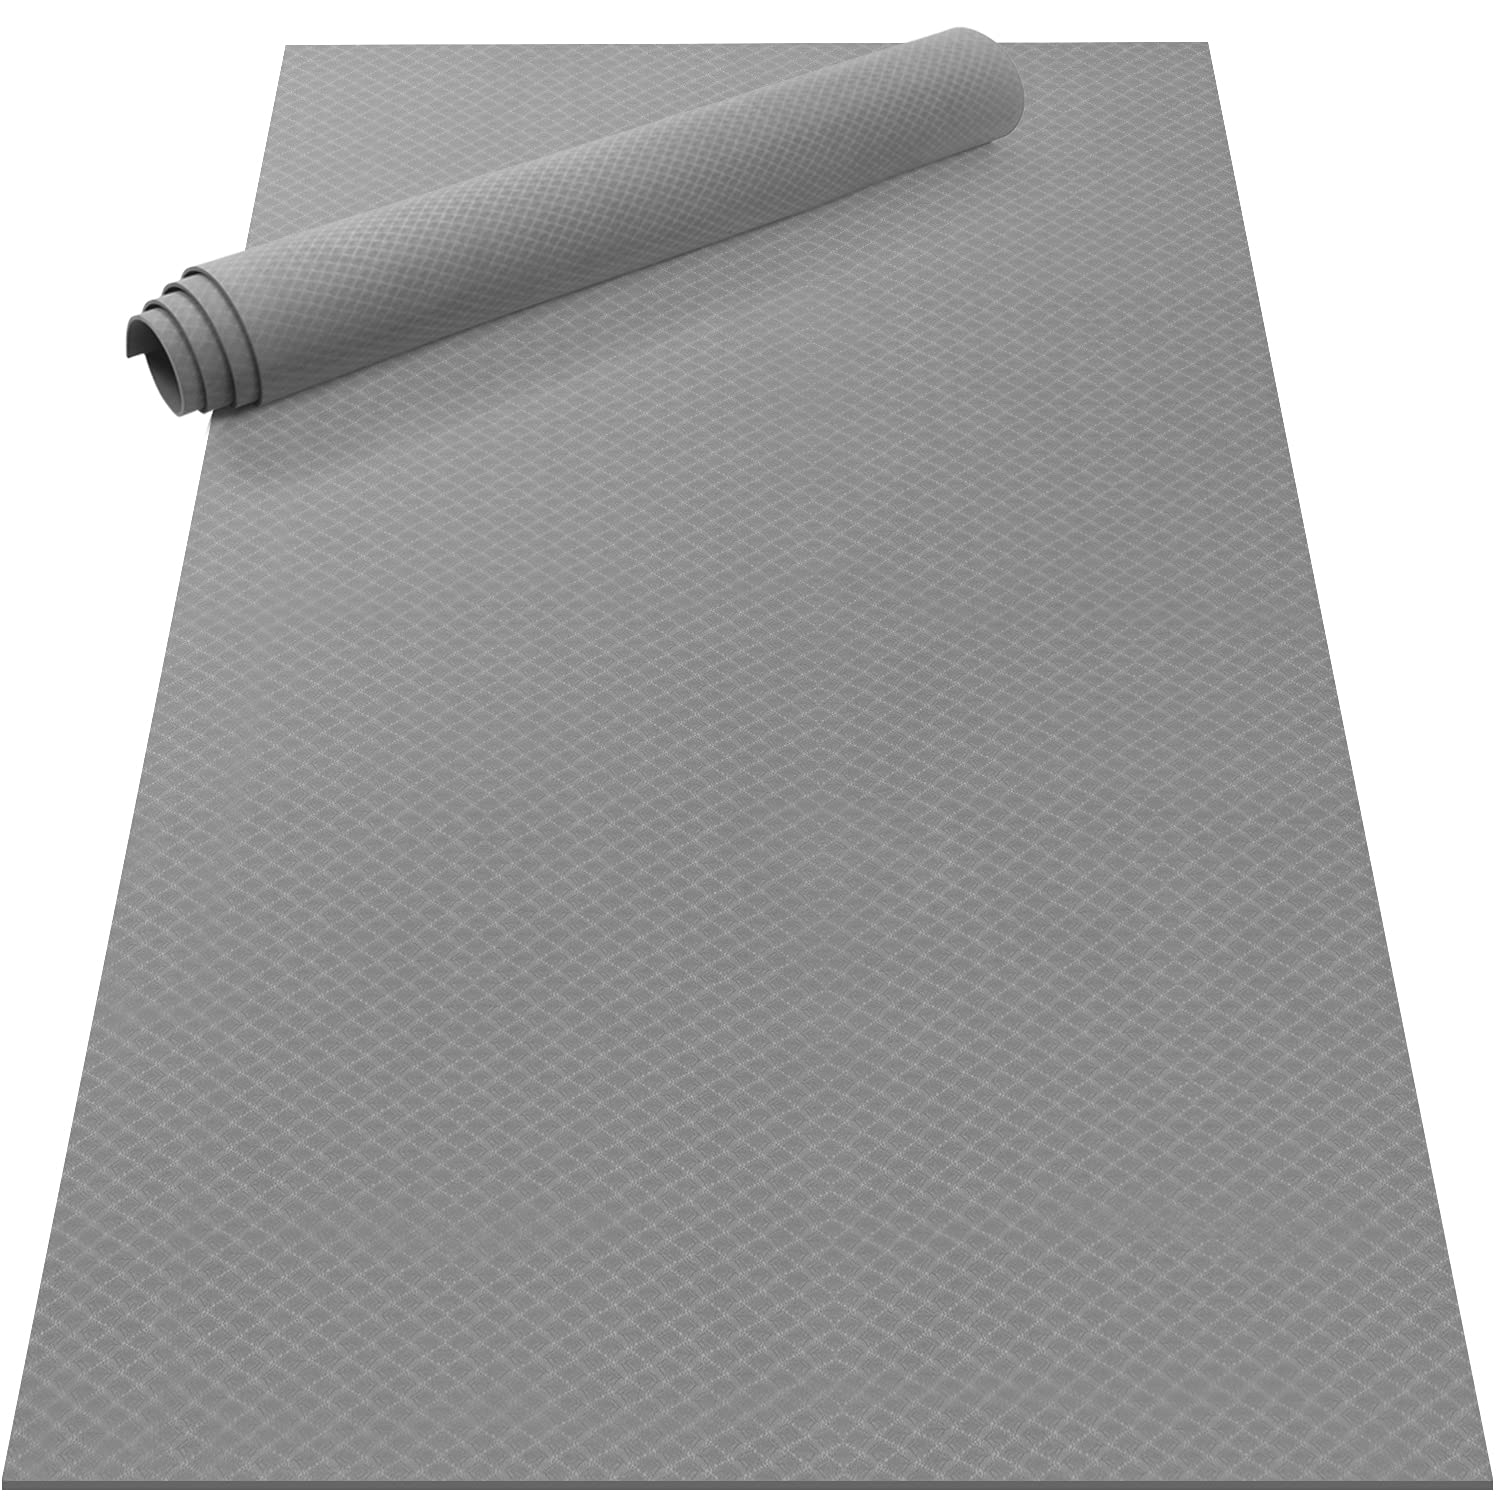 Odoland Large Yoga Mat 78.7 x 51.2 6.56x4.26 x6mm for Pilates Stretching Home Gym Workout Extra Thick Non Slip Exerc